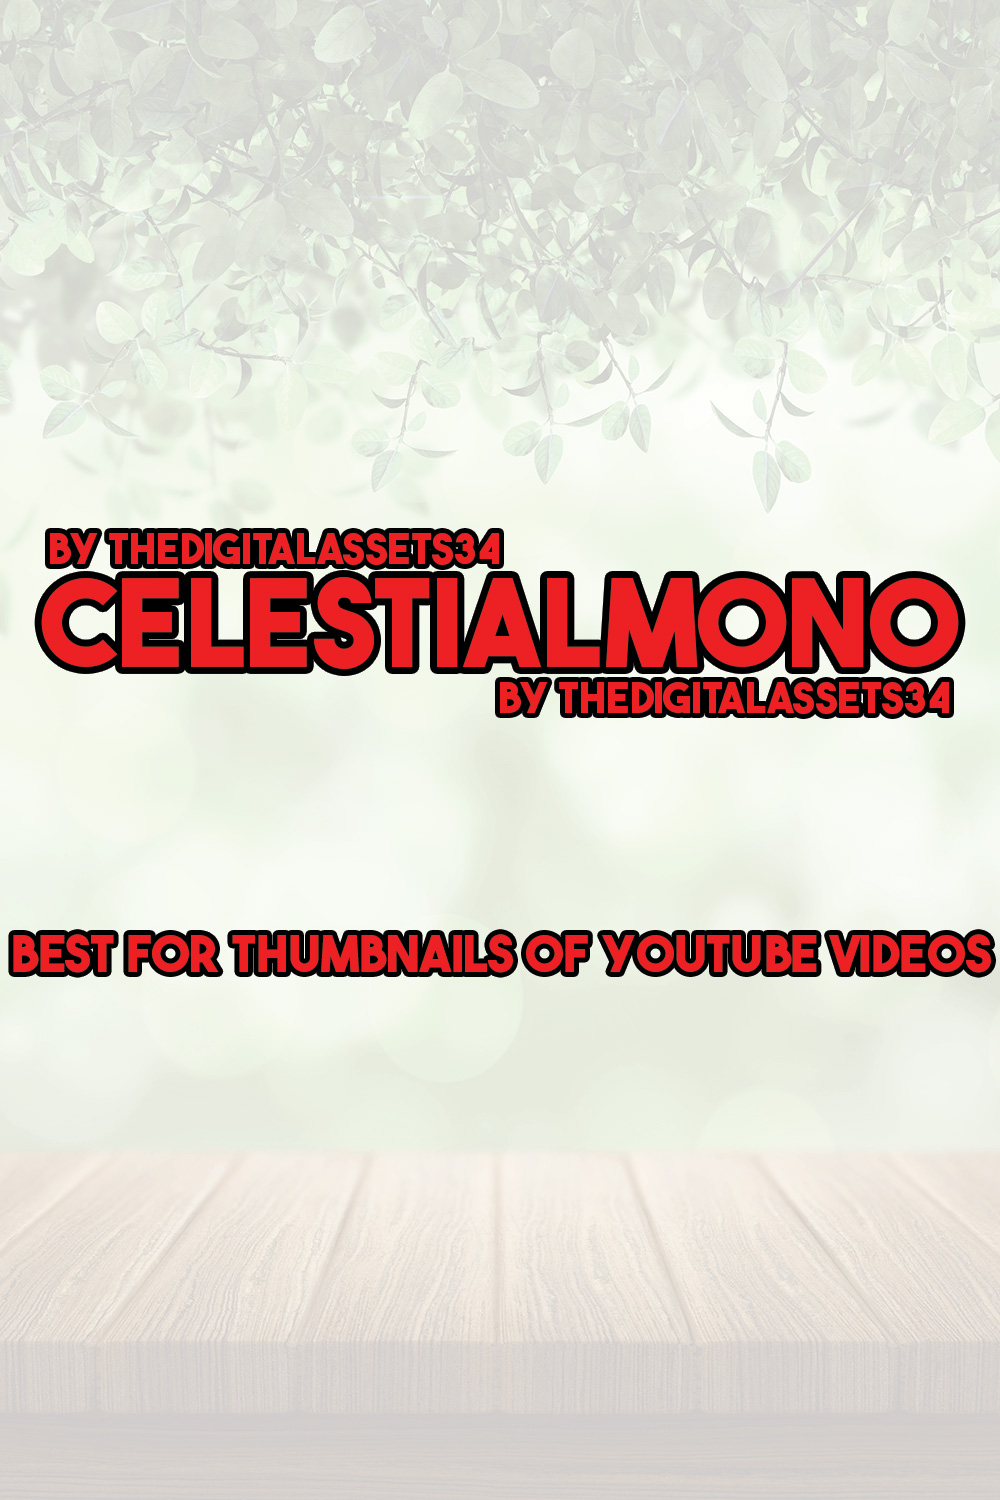 Celetialmono Font Designs | Best For Youtube Thumbnails pinterest preview image.